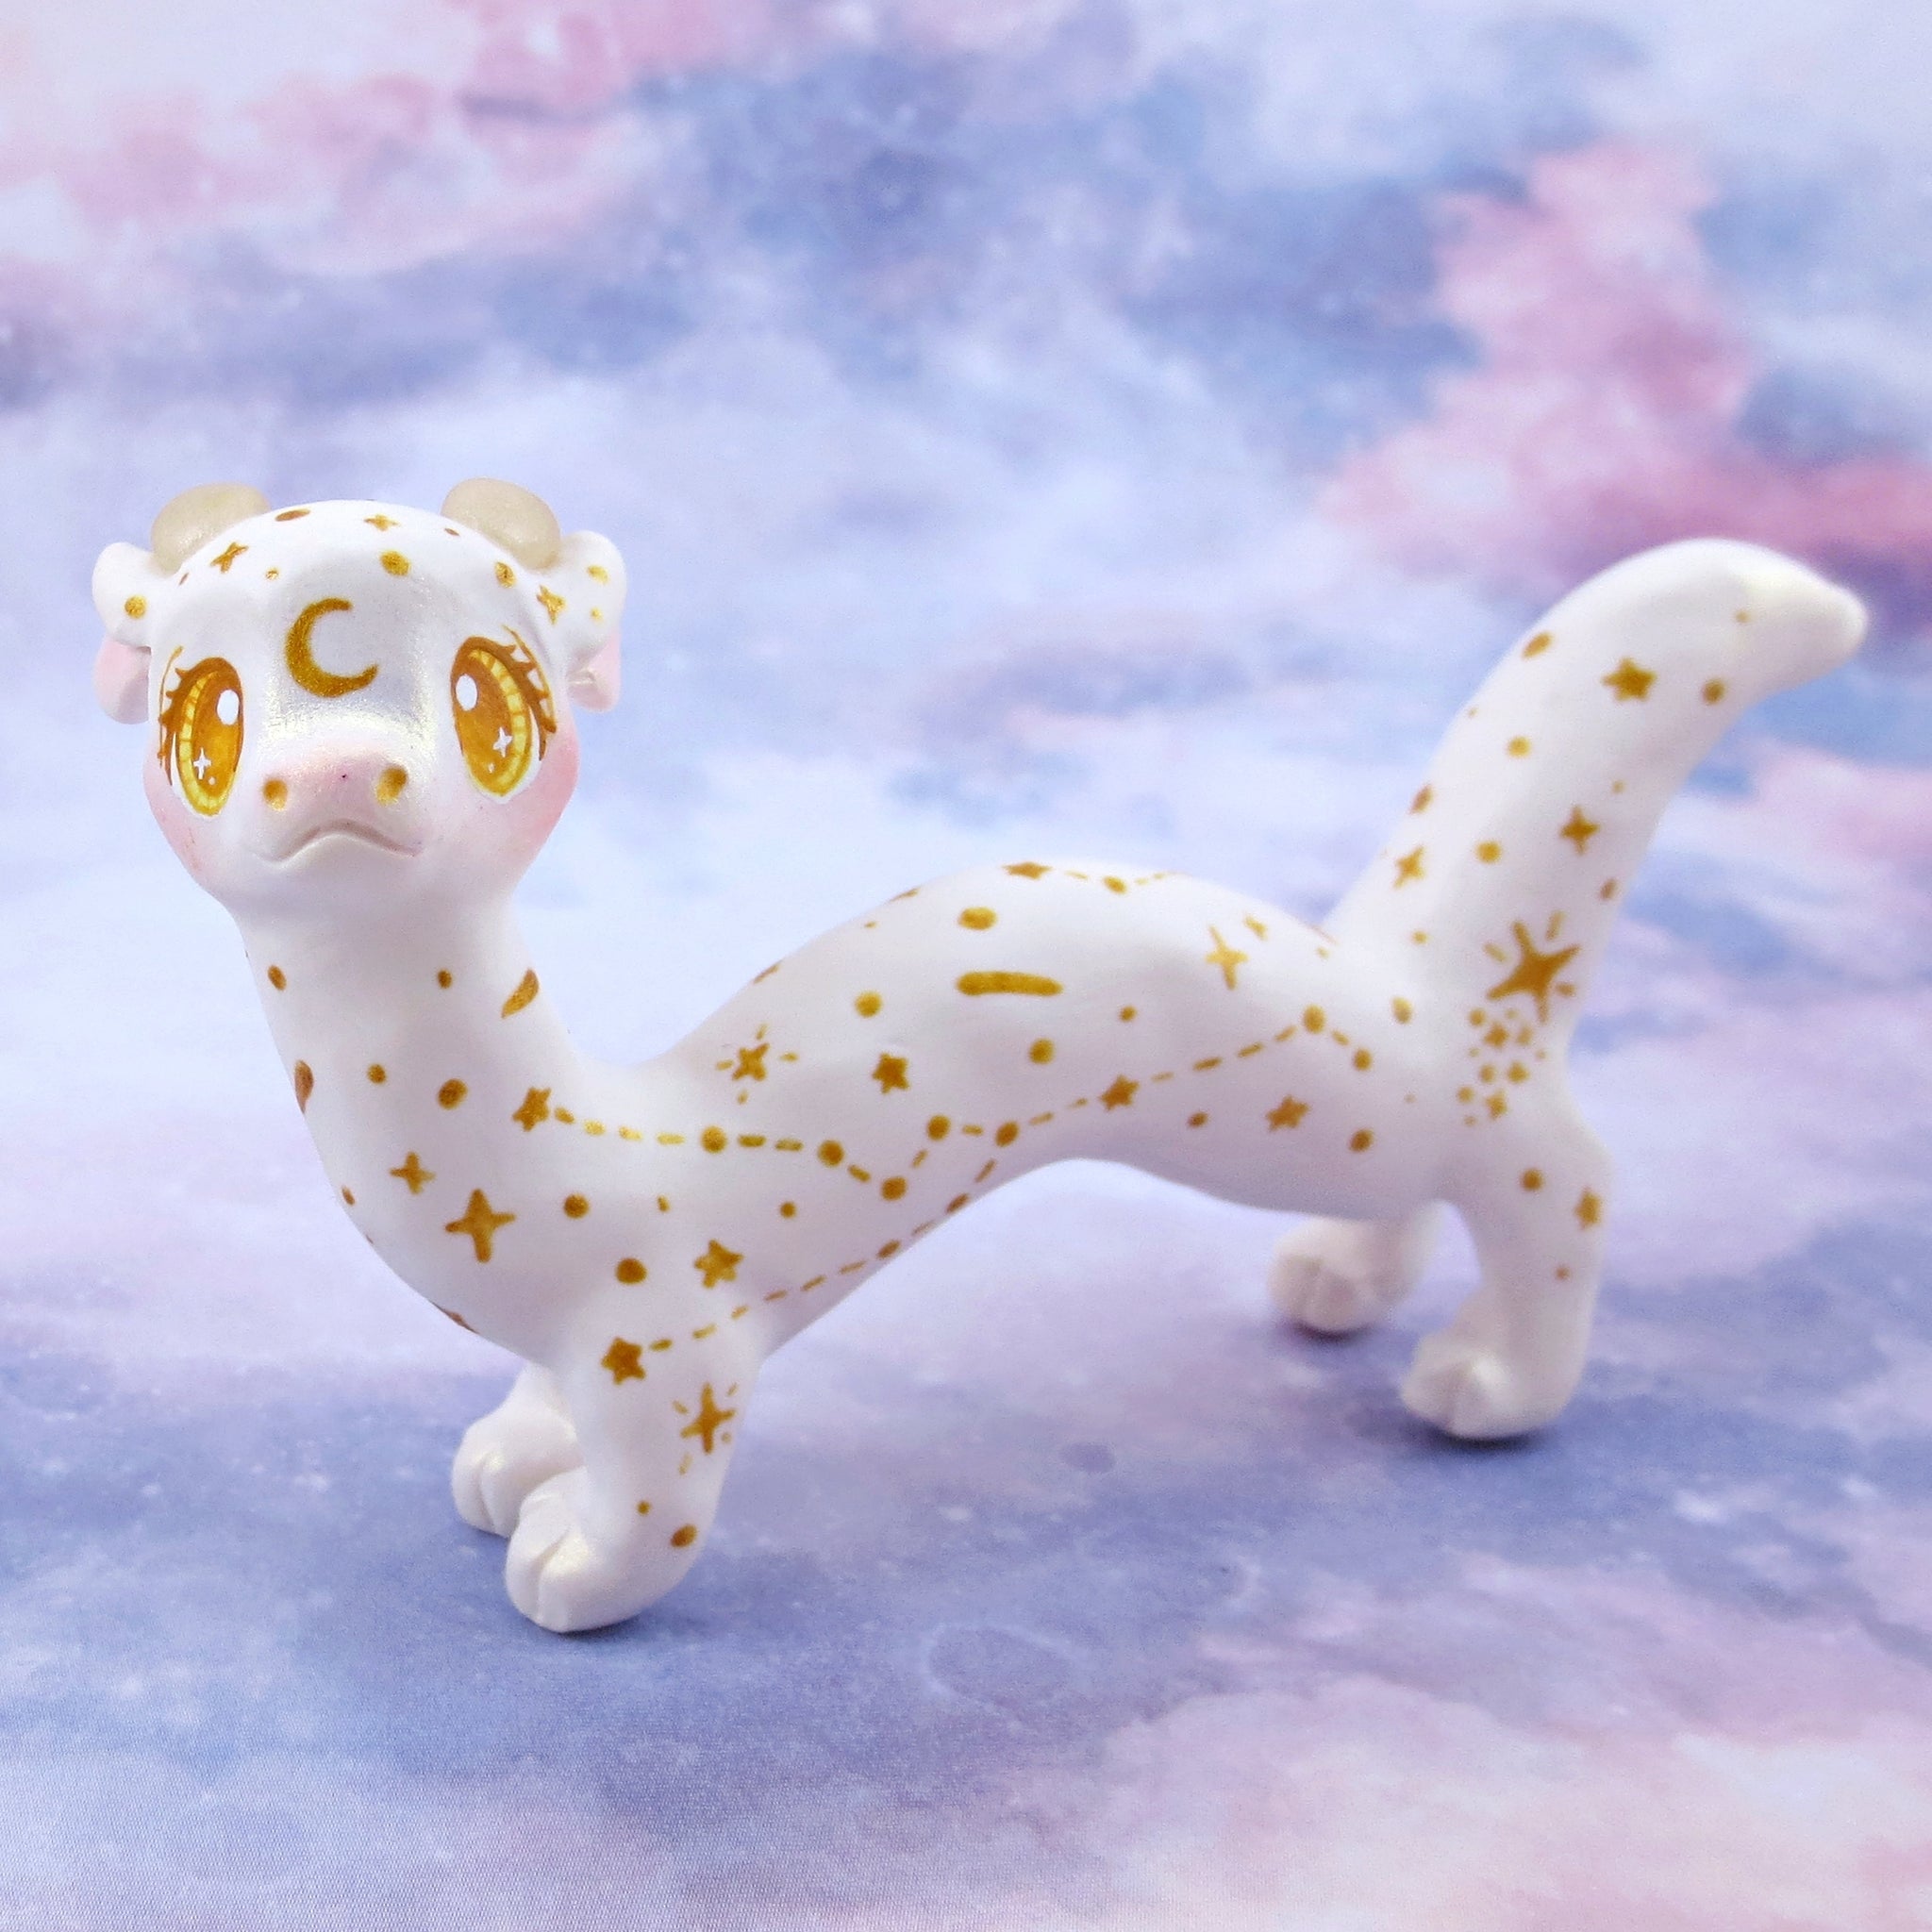 White and Gold Starry Noodle Dragon Figurine - Polymer Clay Animals Celestial Collection